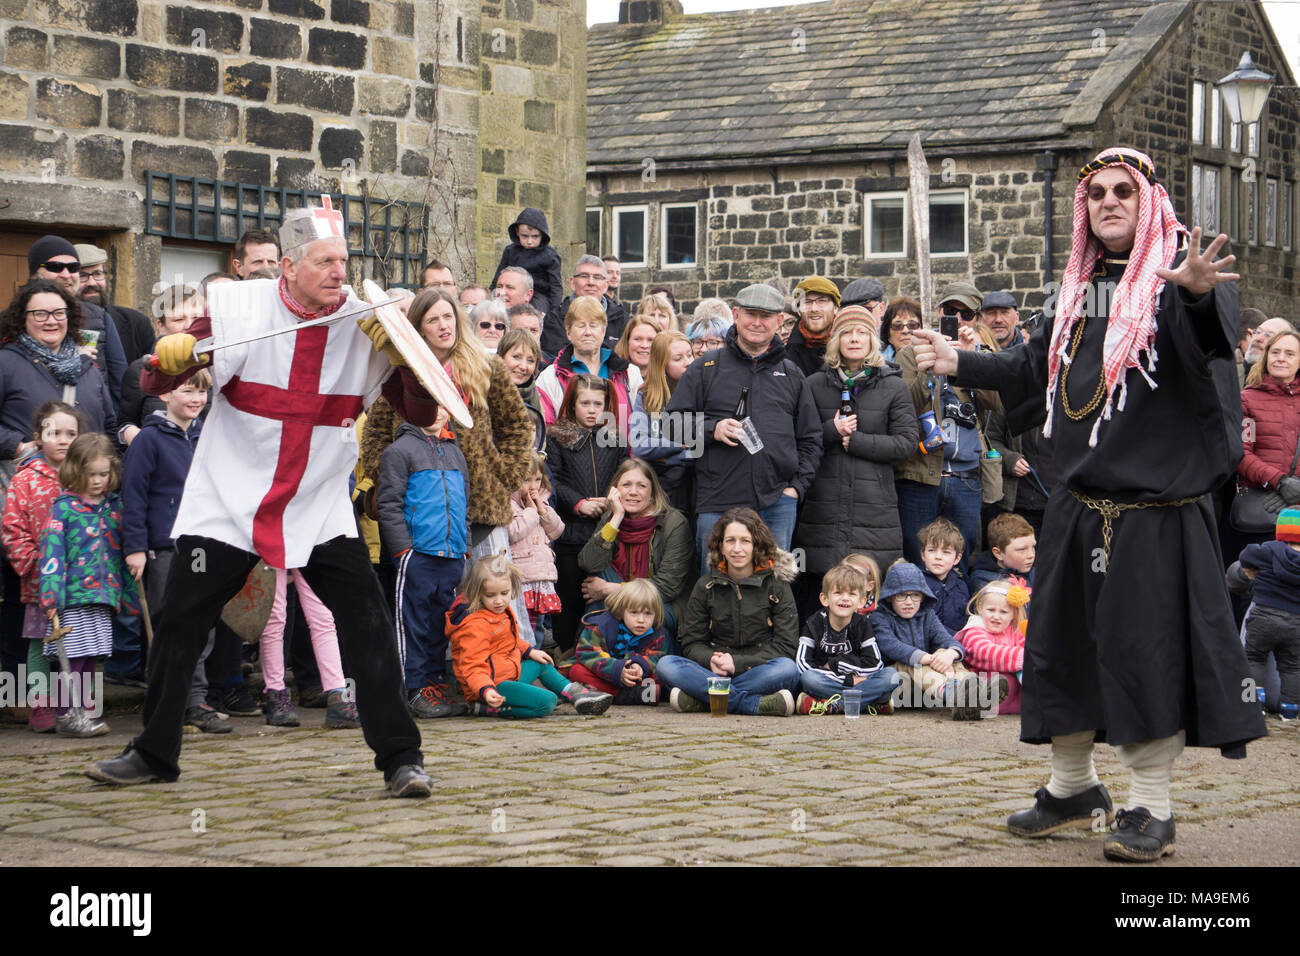 Heptonstall, UK. 30th March, 2018. A traditional Pace Egg play is performed in Heptonstall’s Weavers Square on Good Fridays, attracting hundreds of visitors to the village. The origins are uncertain, but some version of the plays have undoubtedly been performed over many hundreds of years. In the play St George takes on contenders such as Bold Slasher, the Black Prince of Paradine and Hector. Credit: Steve Morgan/Alamy Live News Stock Photo